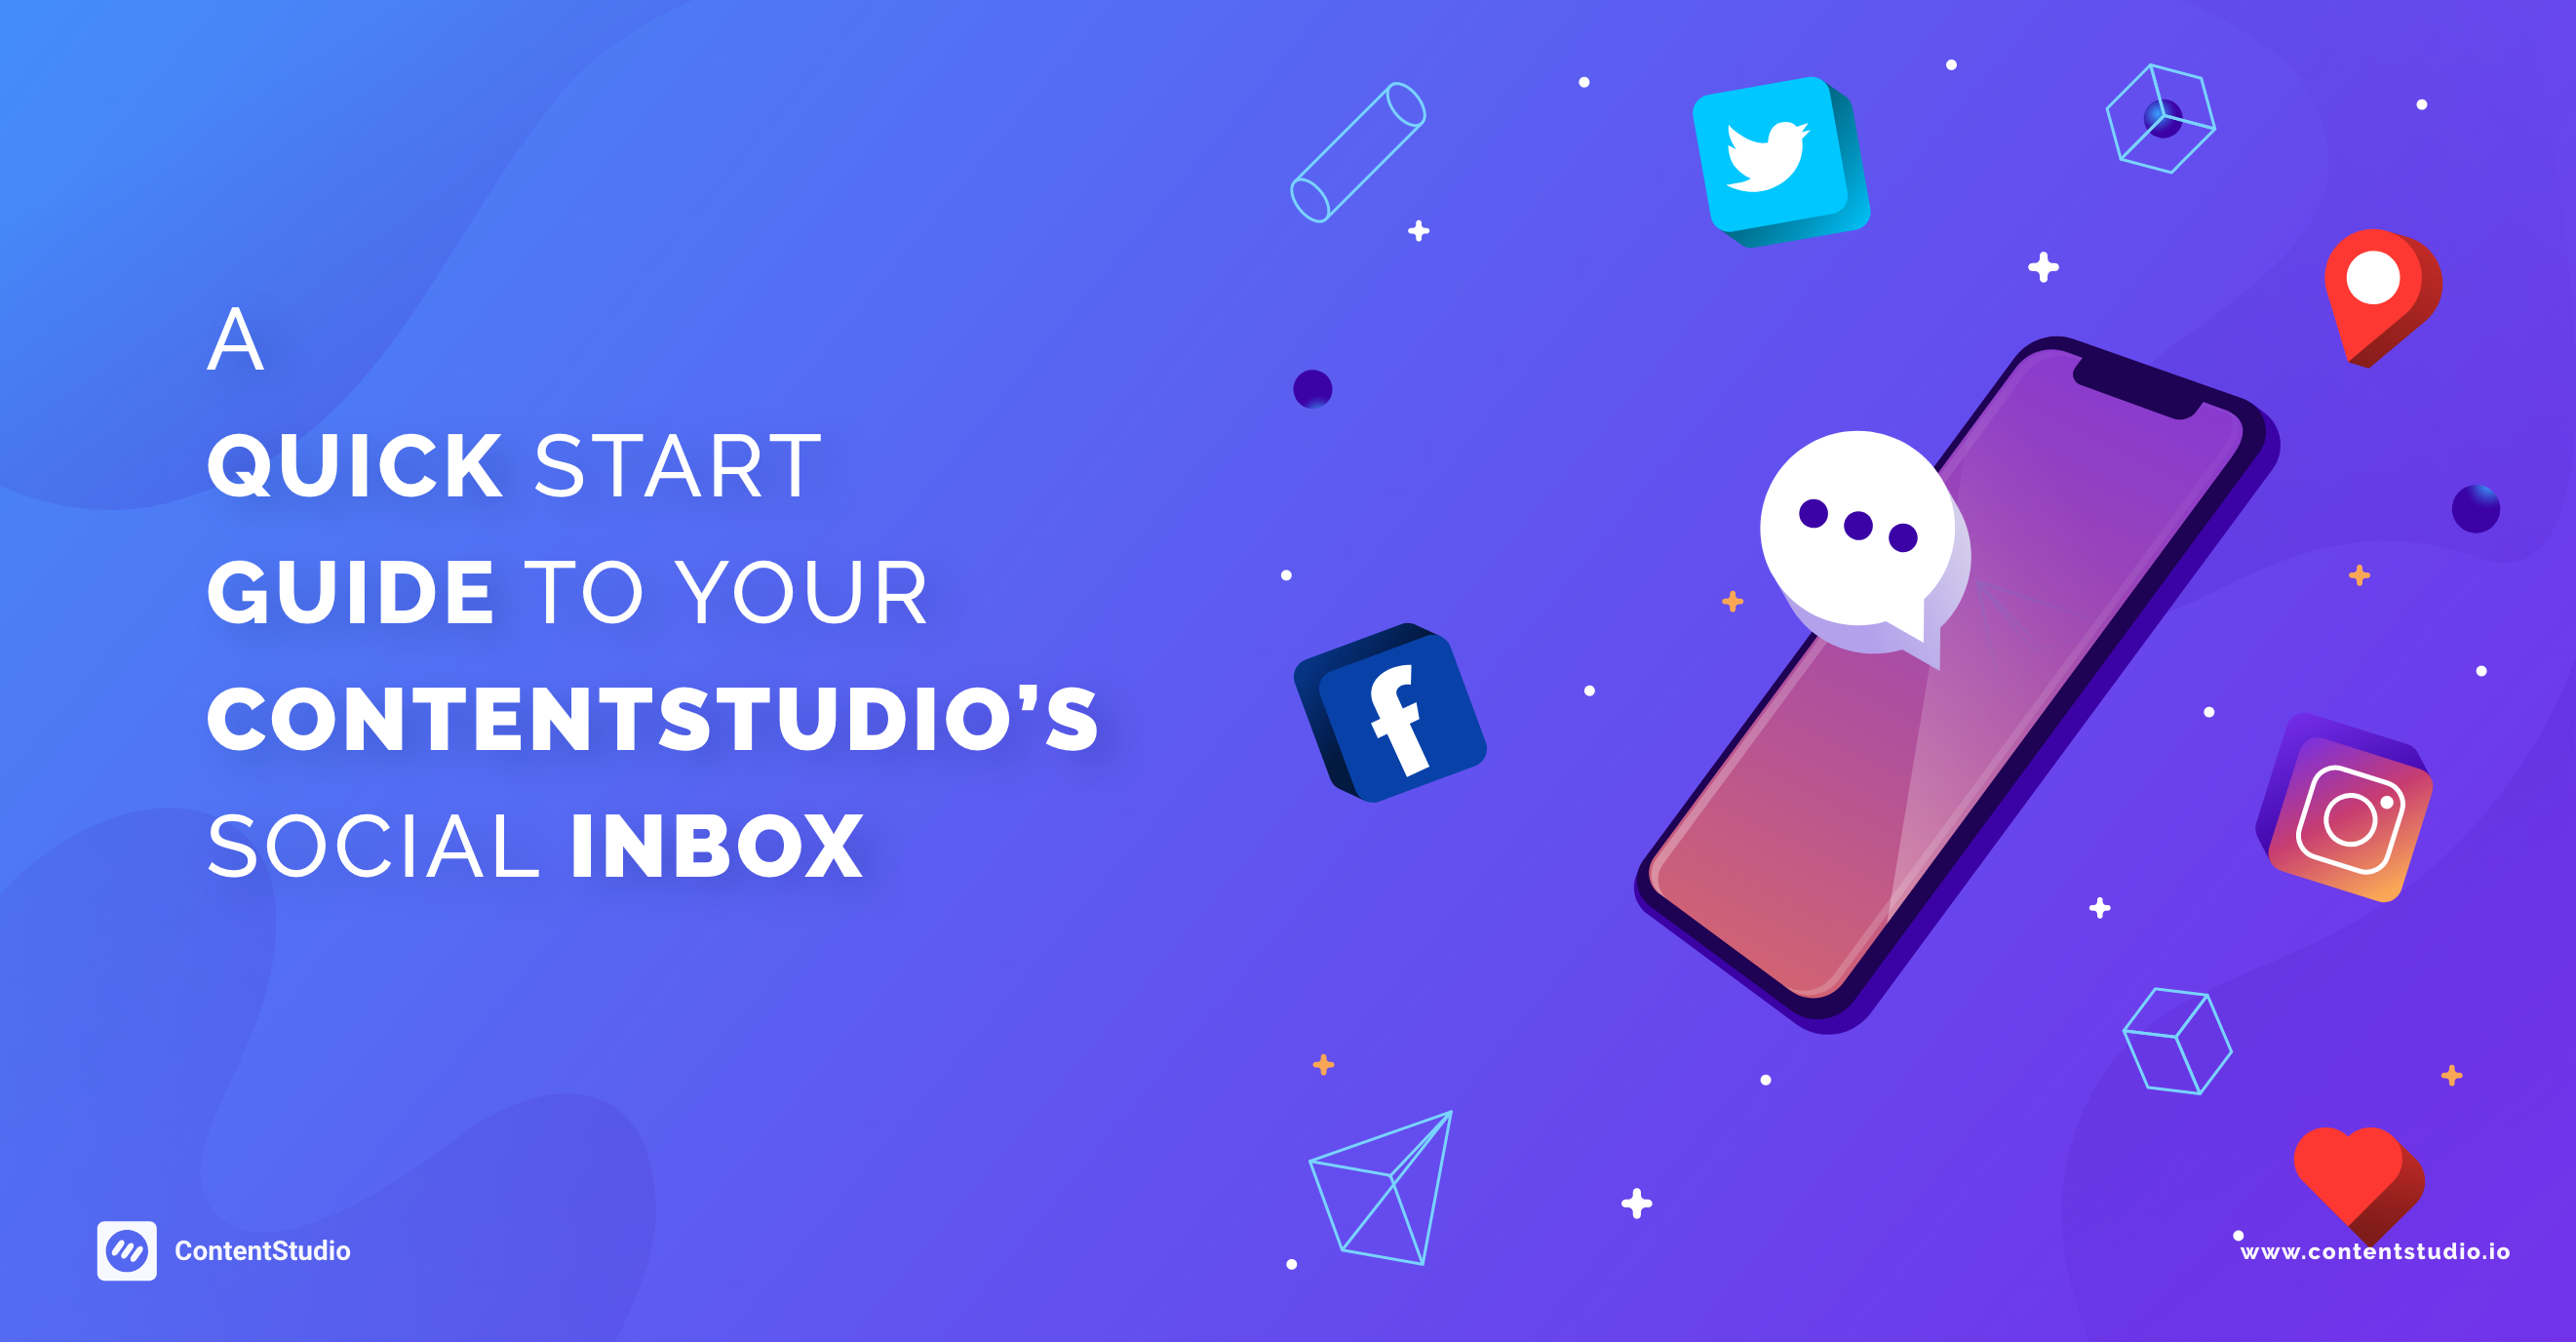 A Quick Start Guide To Your ContentStudio’s Social Inbox